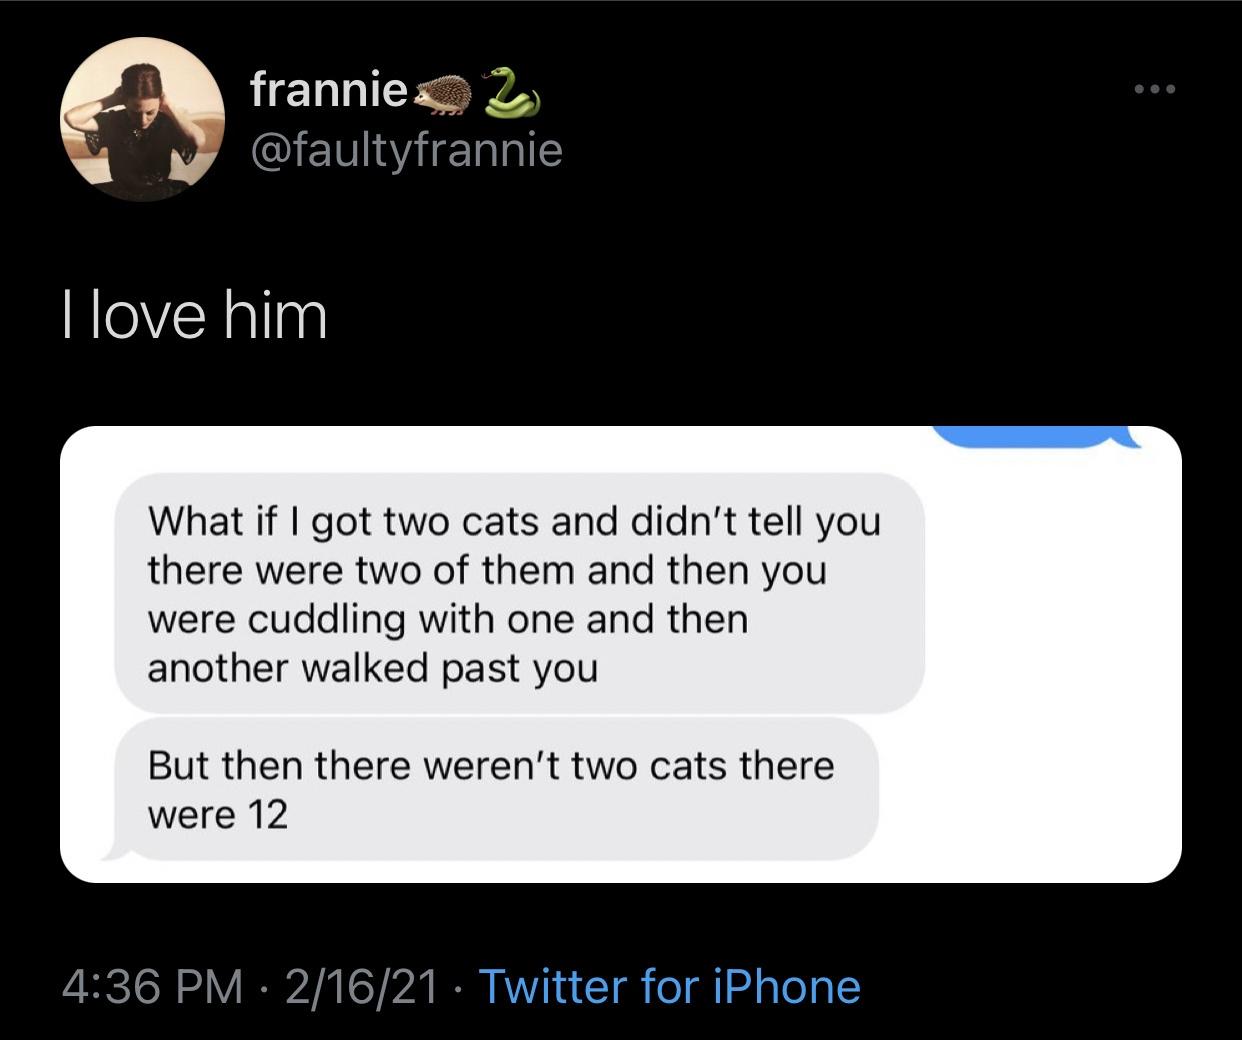 multimedia - frannie. I love him What if I got two cats and didn't tell you there were two of them and then you were cuddling with one and then another walked past you But then there weren't two cats there were 12 21621 Twitter for iPhone